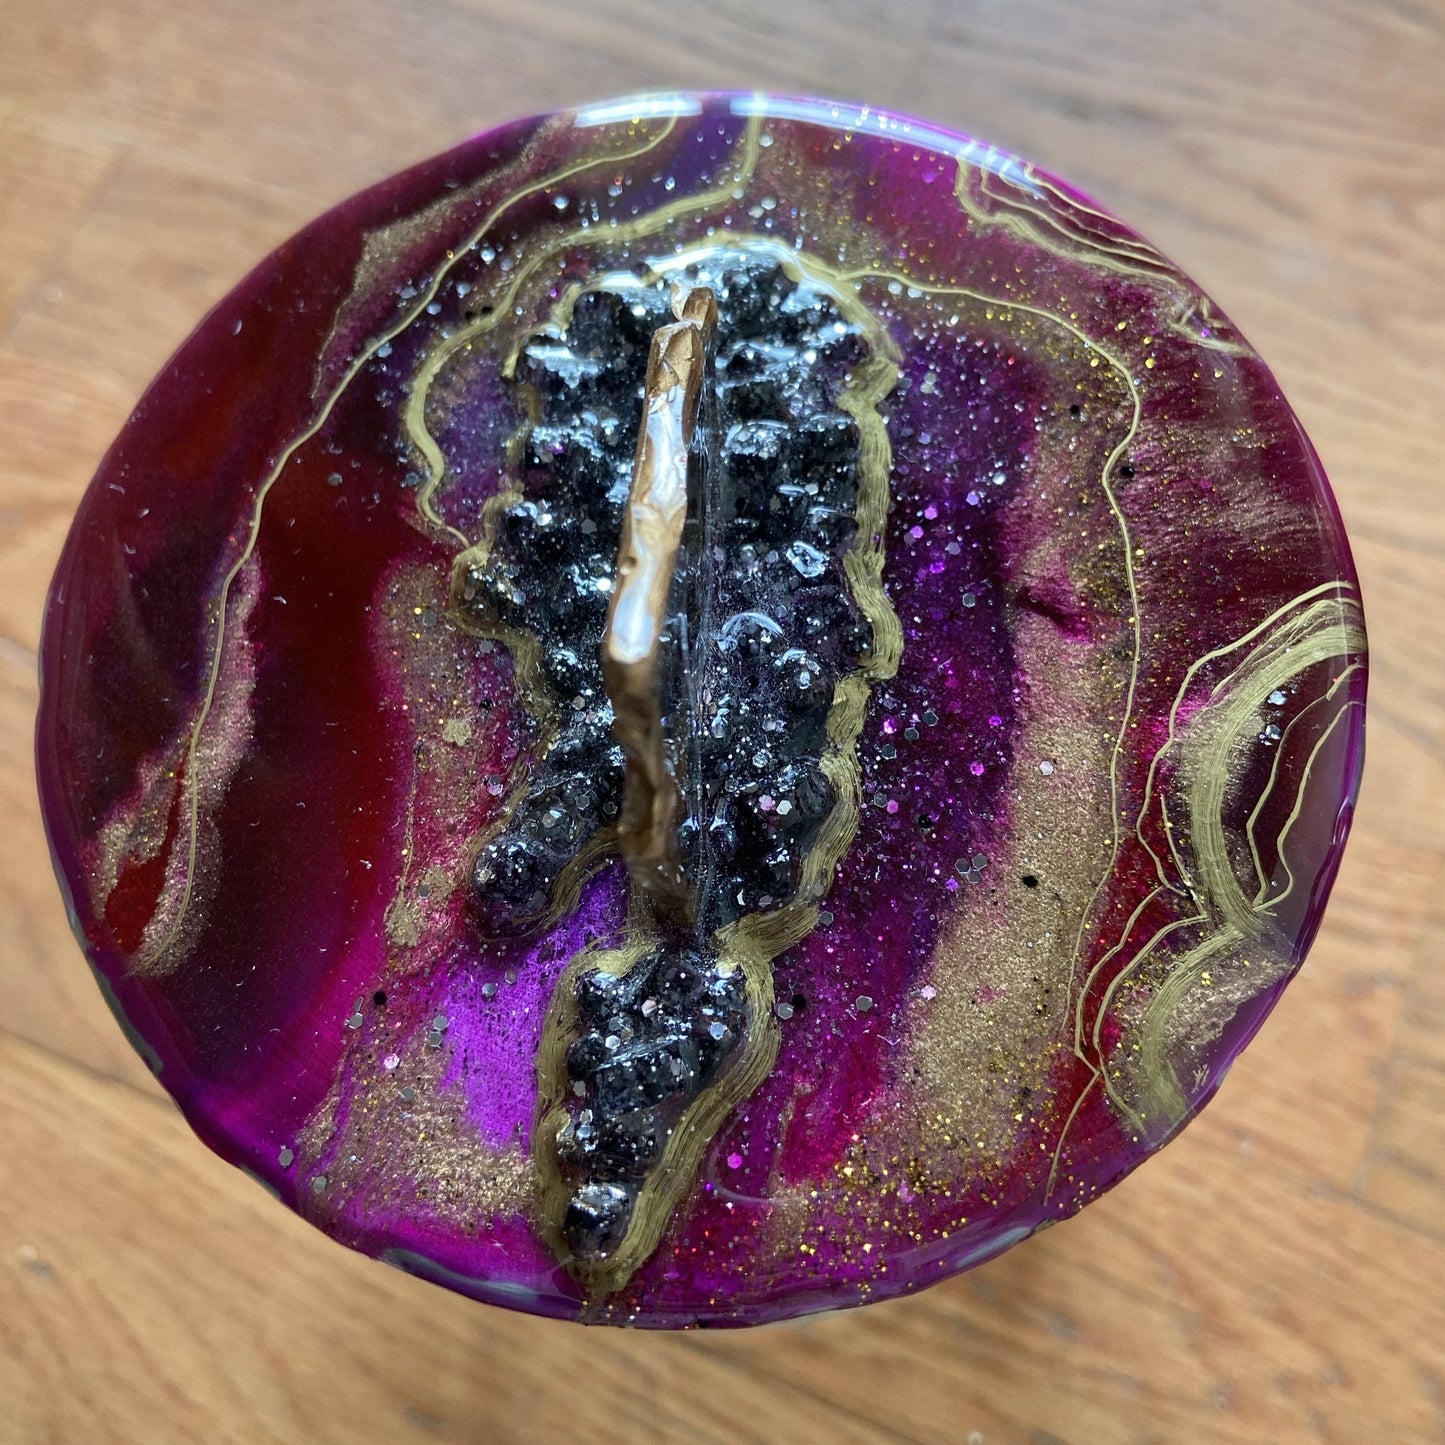 burgundy canister lid with purple hues in geode style - Mamota Creative